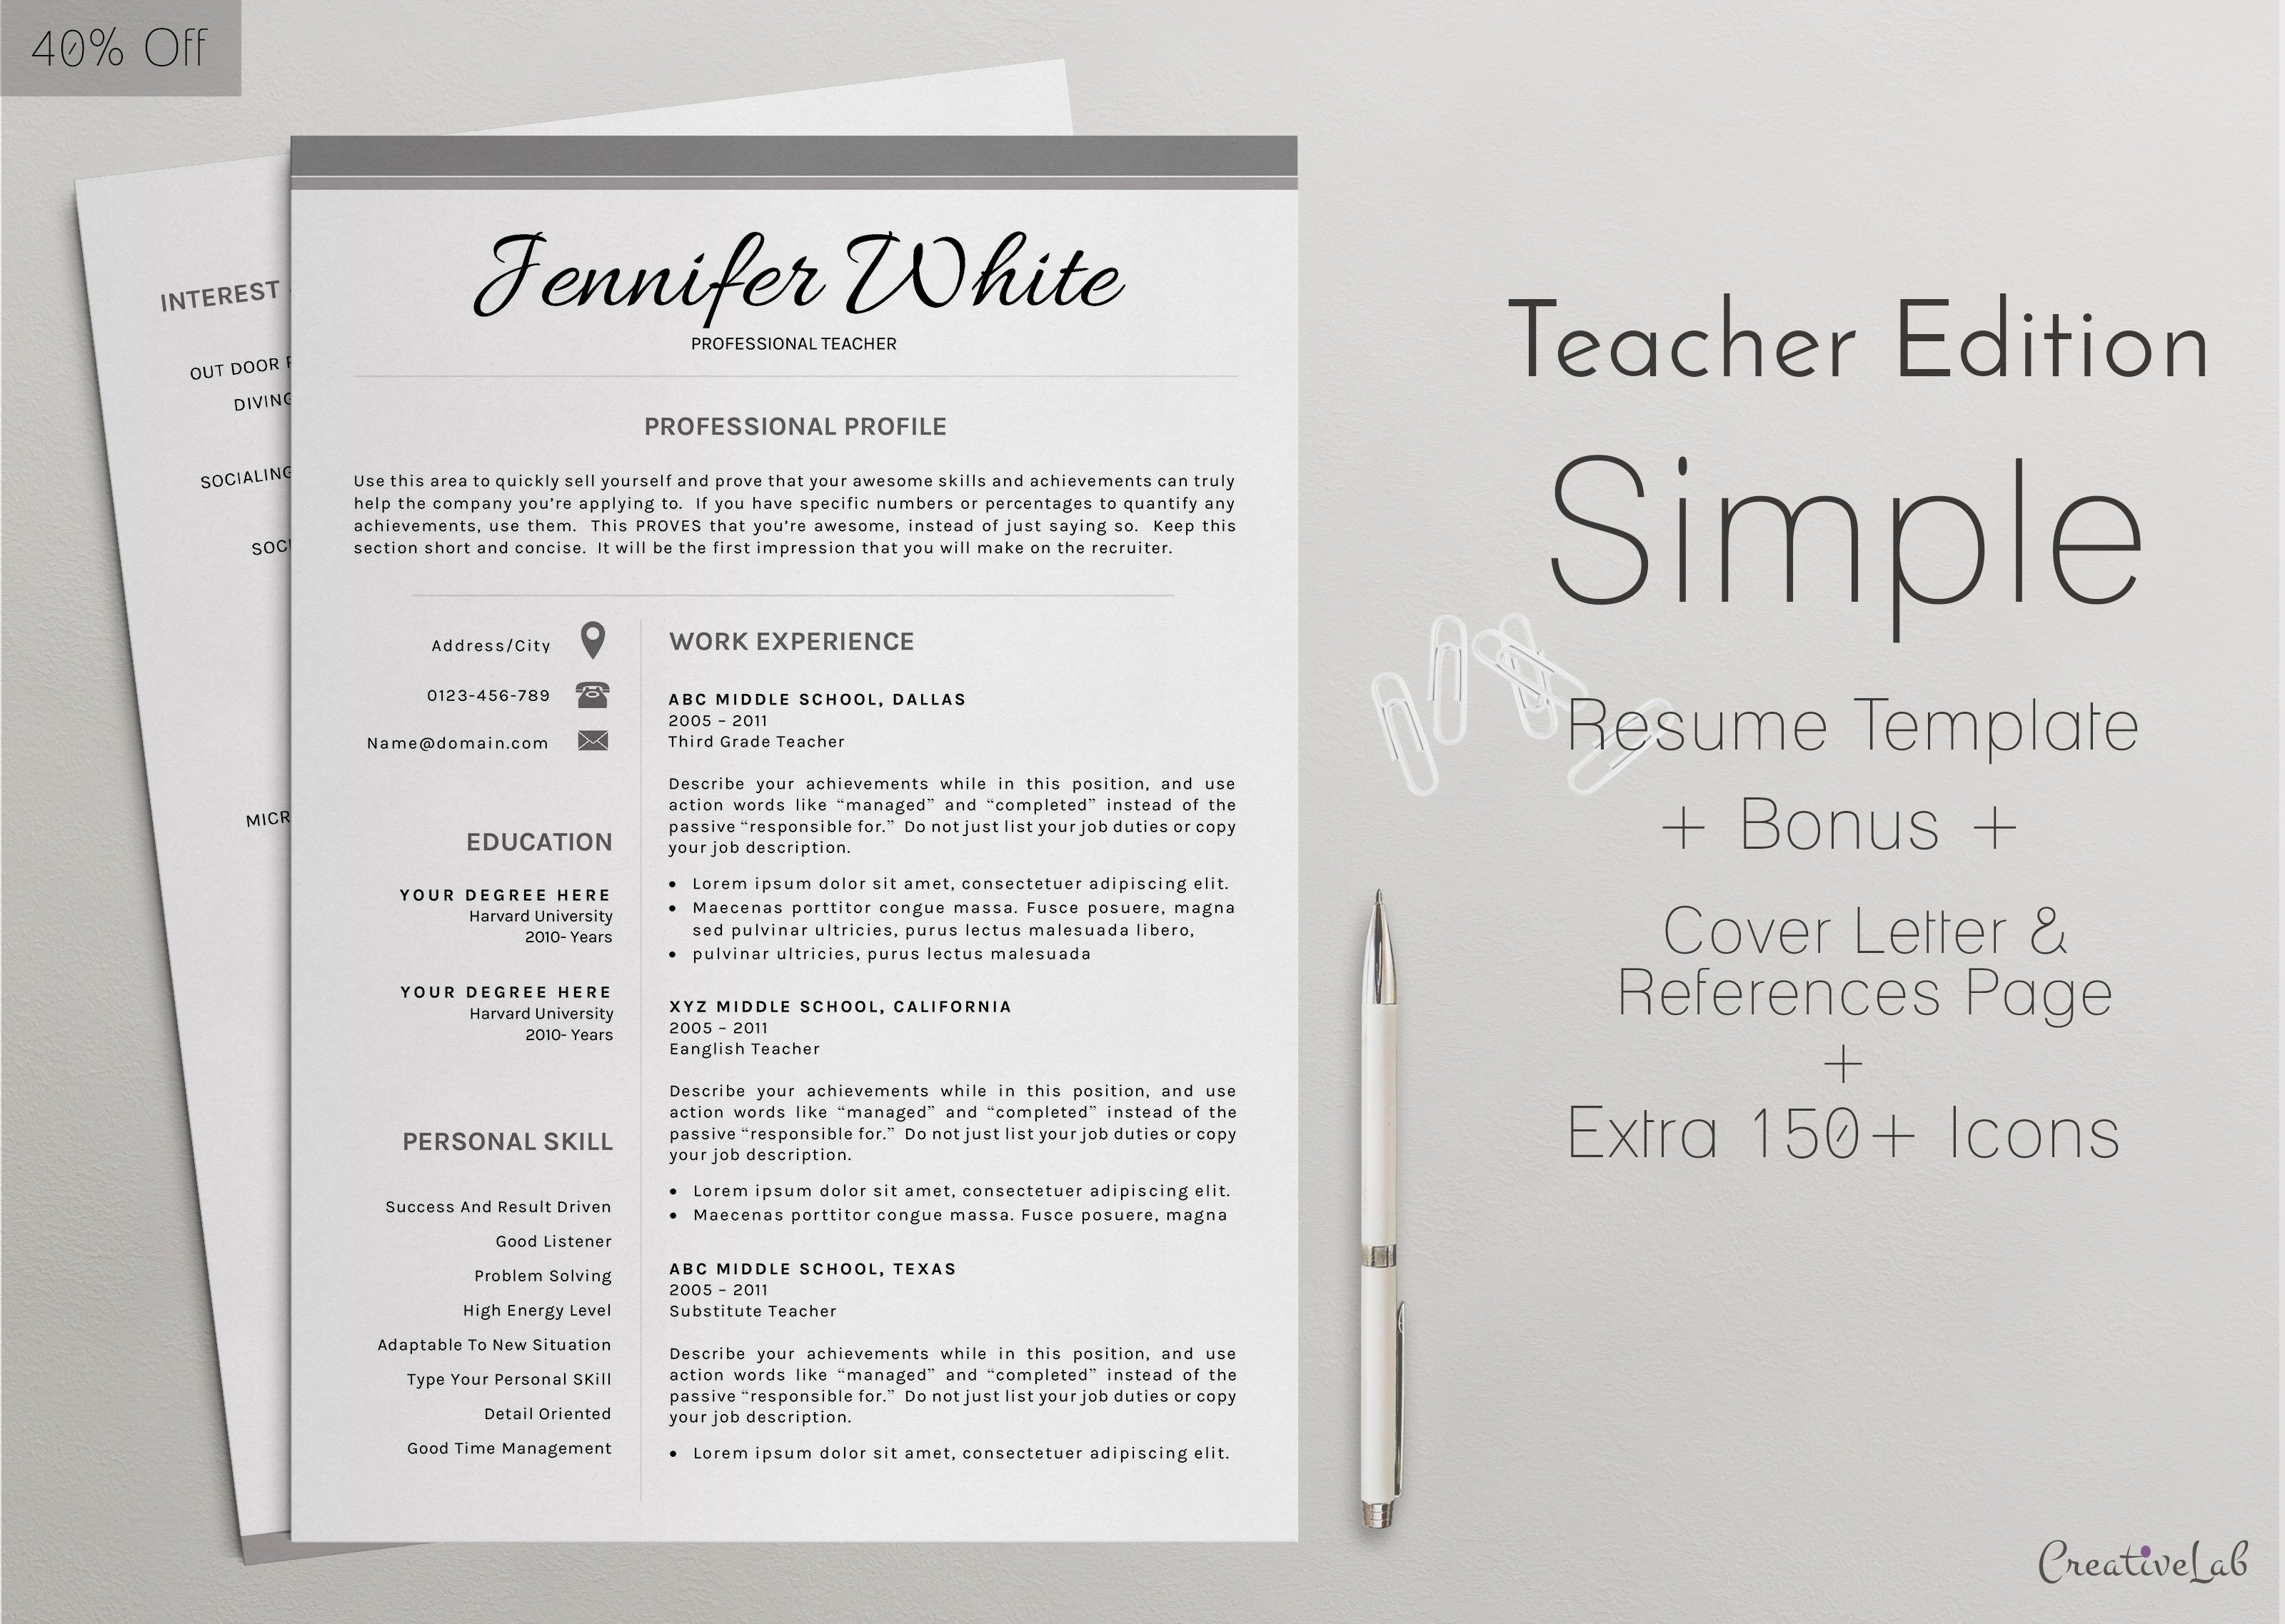 Professional Resume Templates cover image.